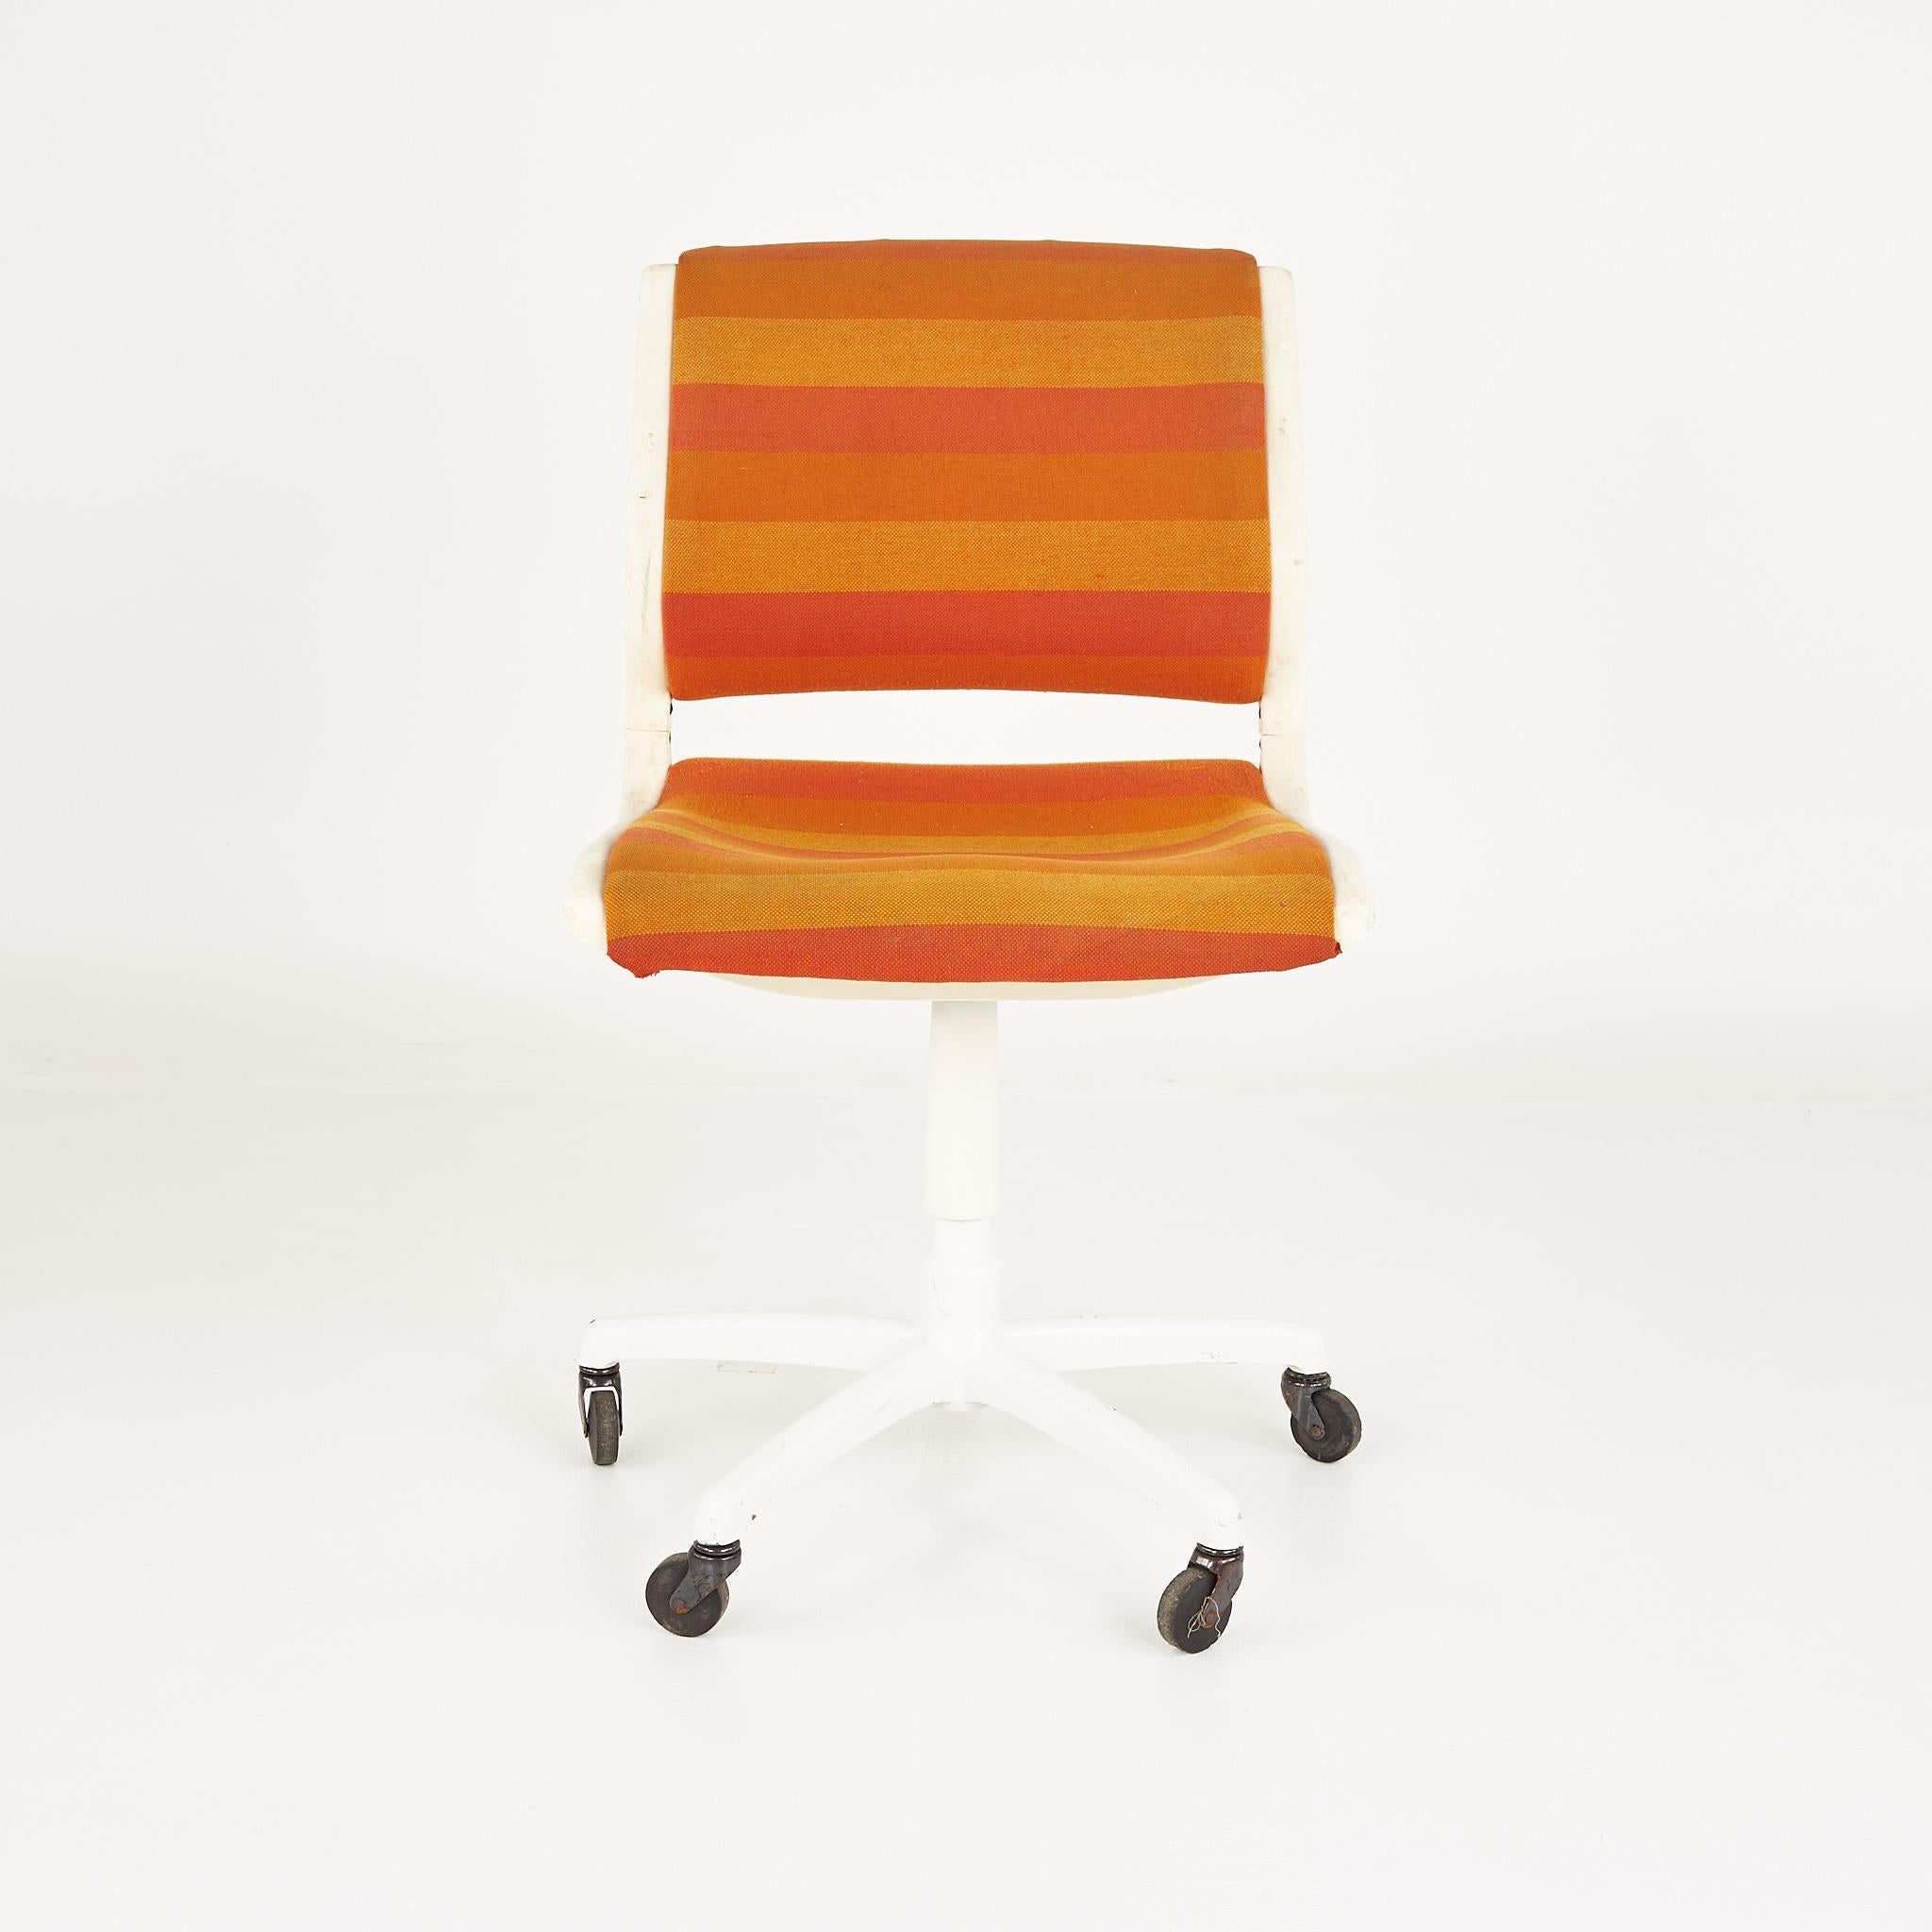 Mid century orange and white desk chair

This chair measures: 20.5 wide x 29 deep x 35 inches high, with a seat height of 25 inches

?All pieces of furniture can be had in what we call restored vintage condition. That means the piece is restored